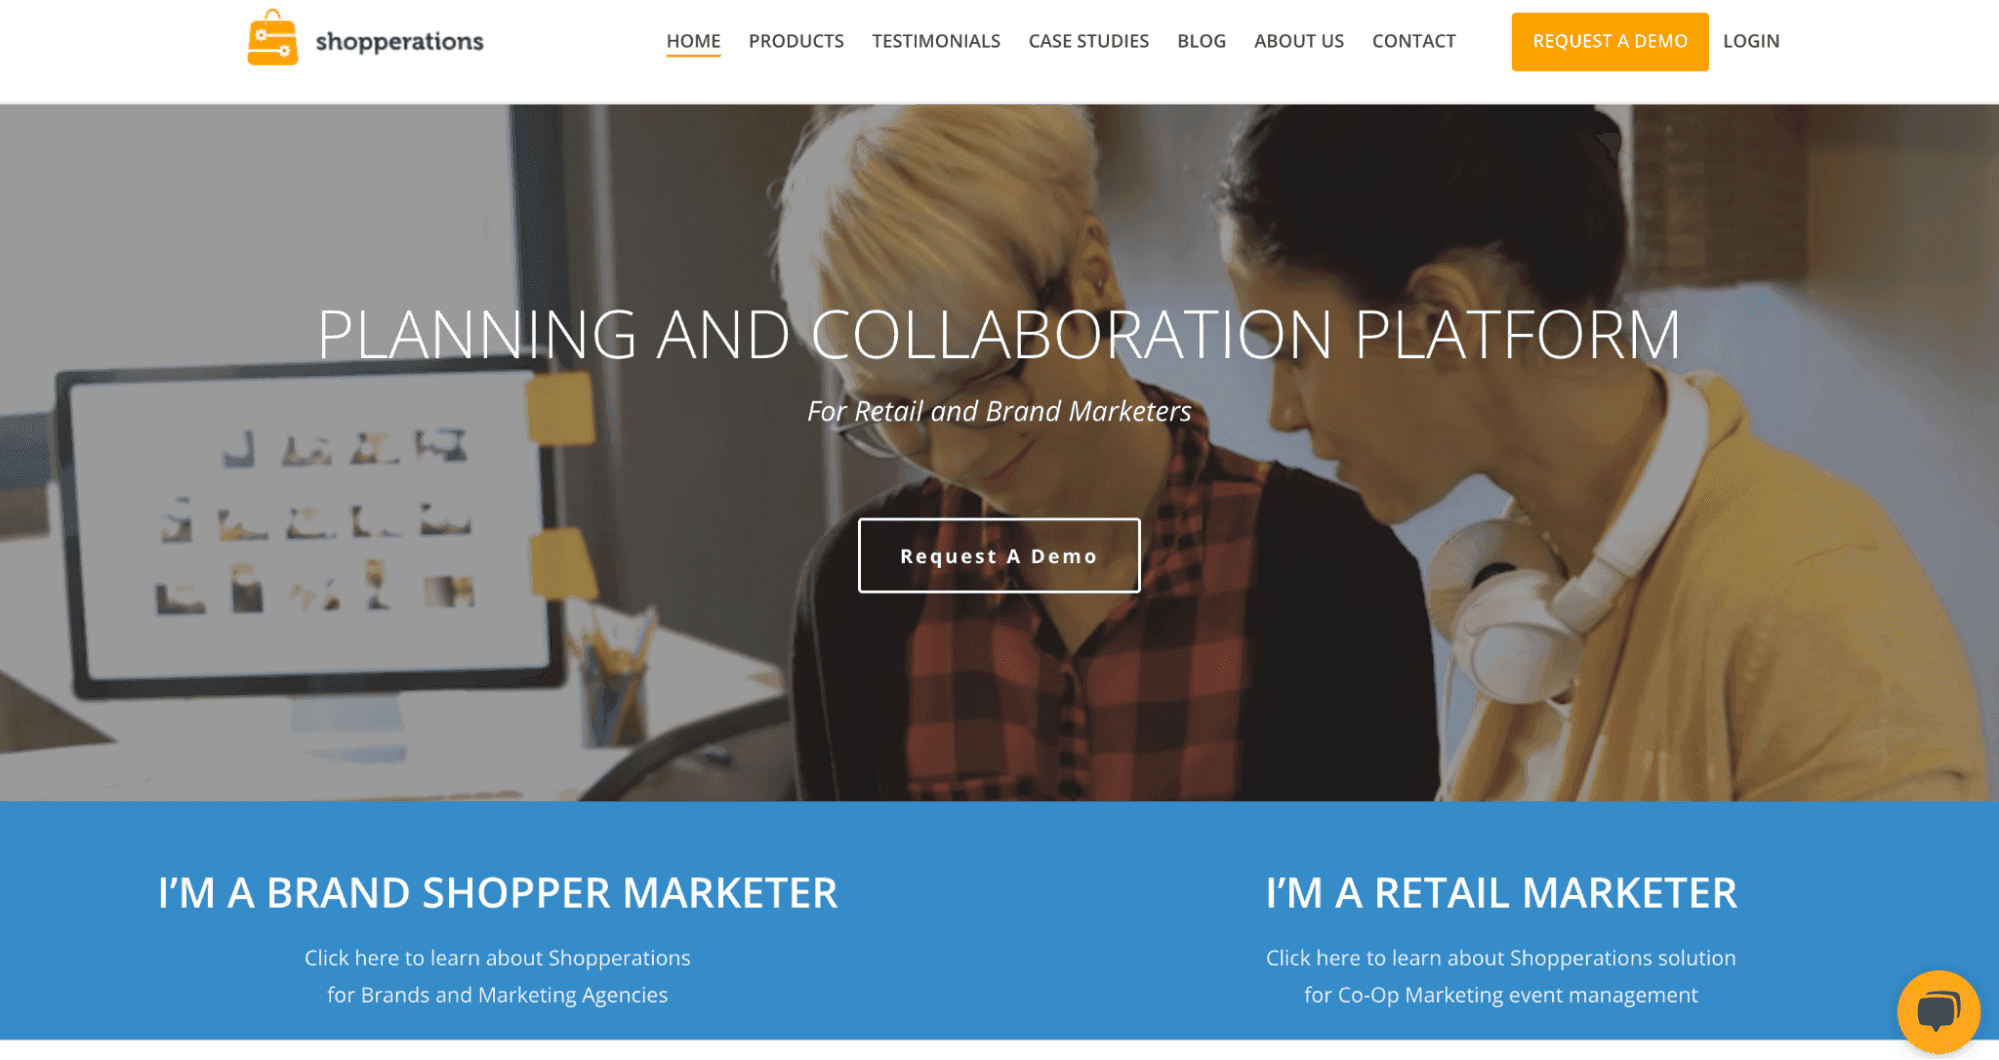 Use shopperations to help plan and organize all your marketing and collaboration.